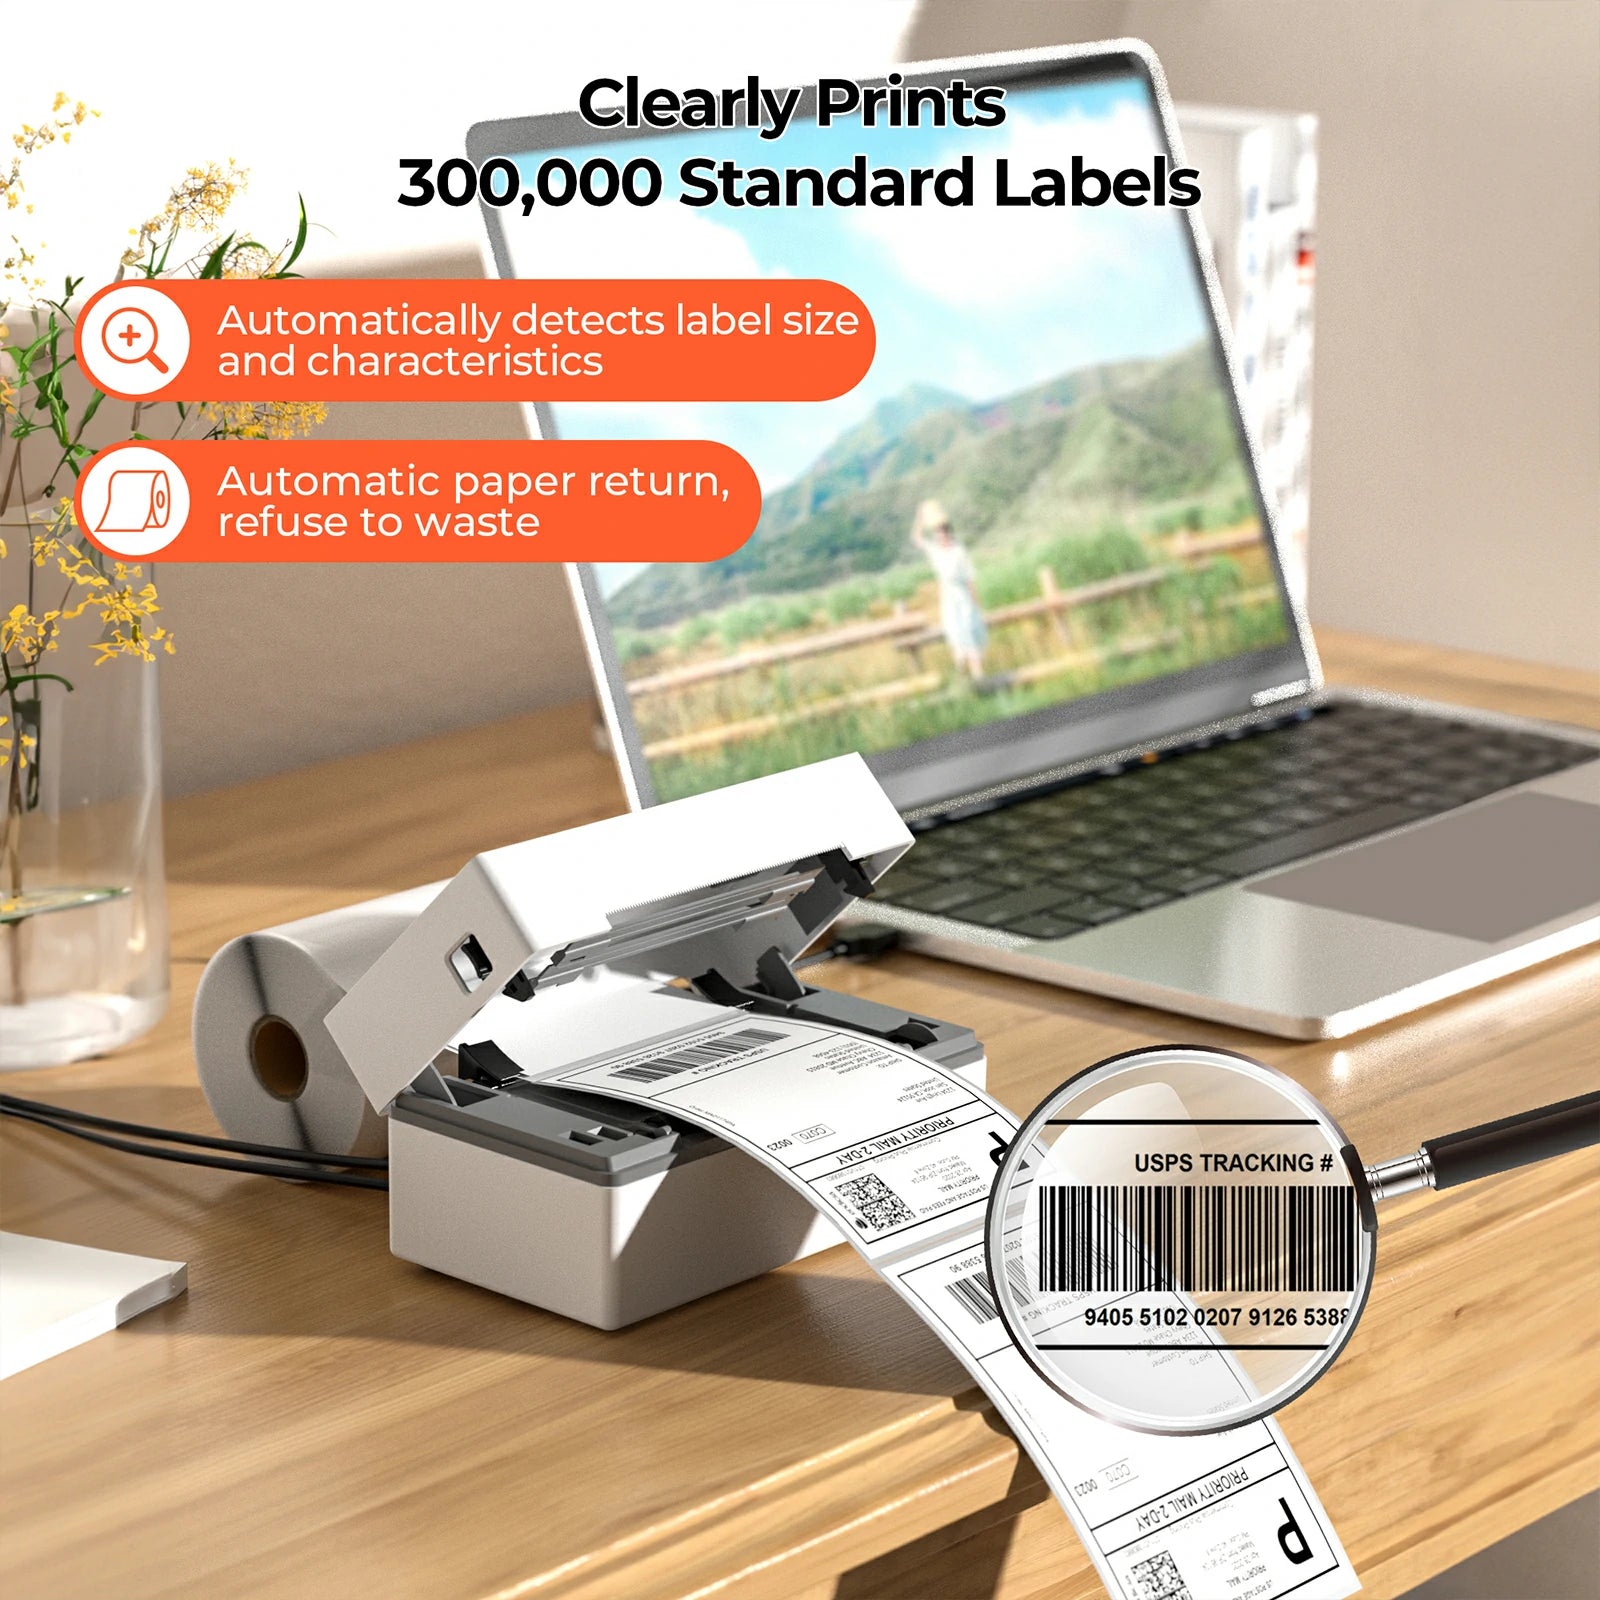 MUNBYN P130 USB shipping label printer ensures barcodes, text, and graphics are crisp, clear, and easily scannable, reducing errors in shipping and handling.